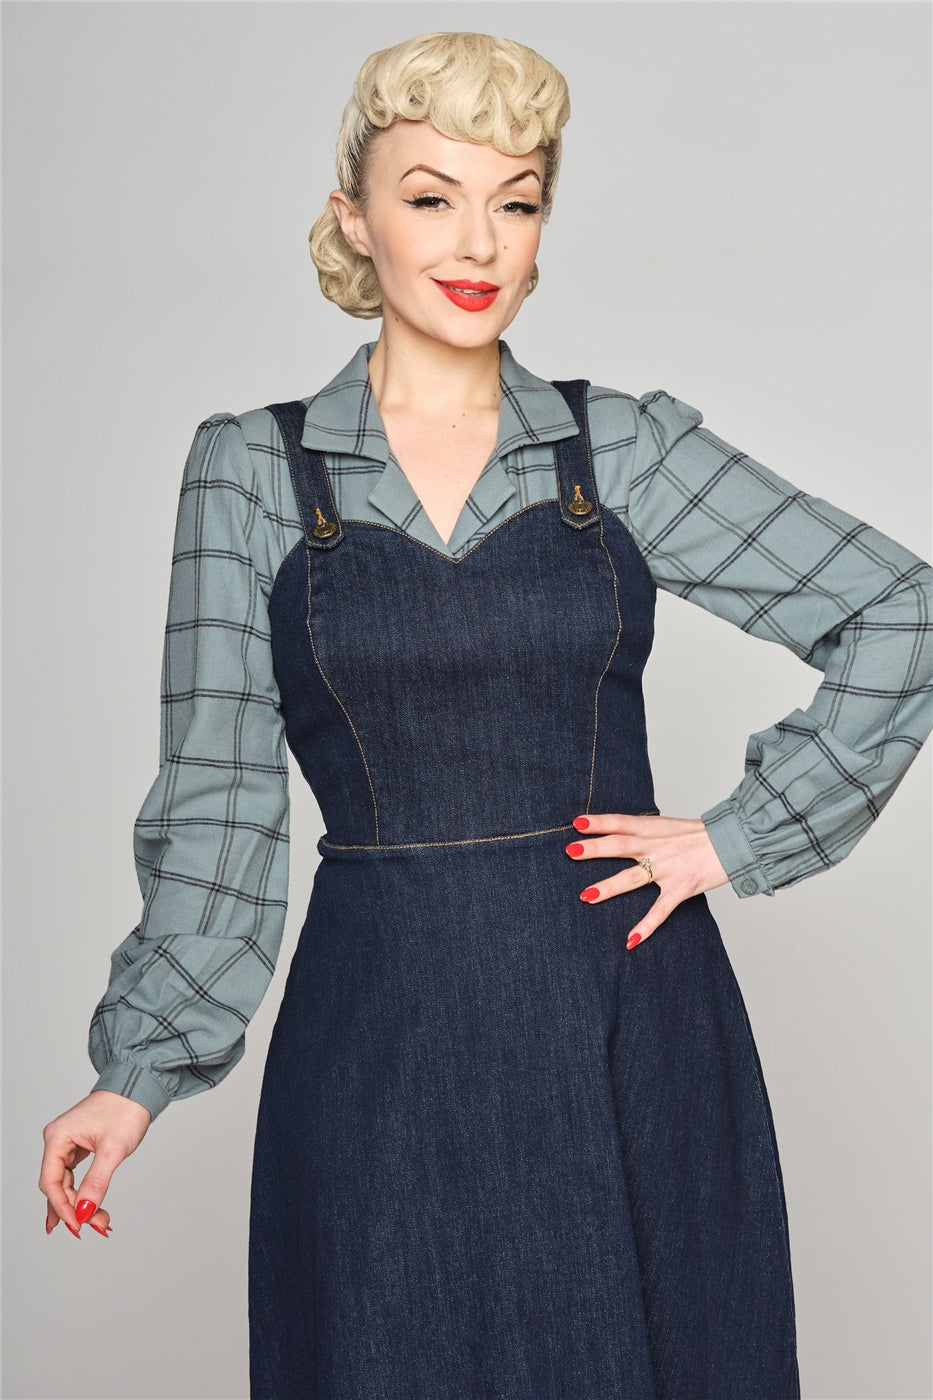 Blonde woman with red lipstick and a demure smile standing with one hand on her hip wearing a blue-grey checked blouse and a denim pinafore dress